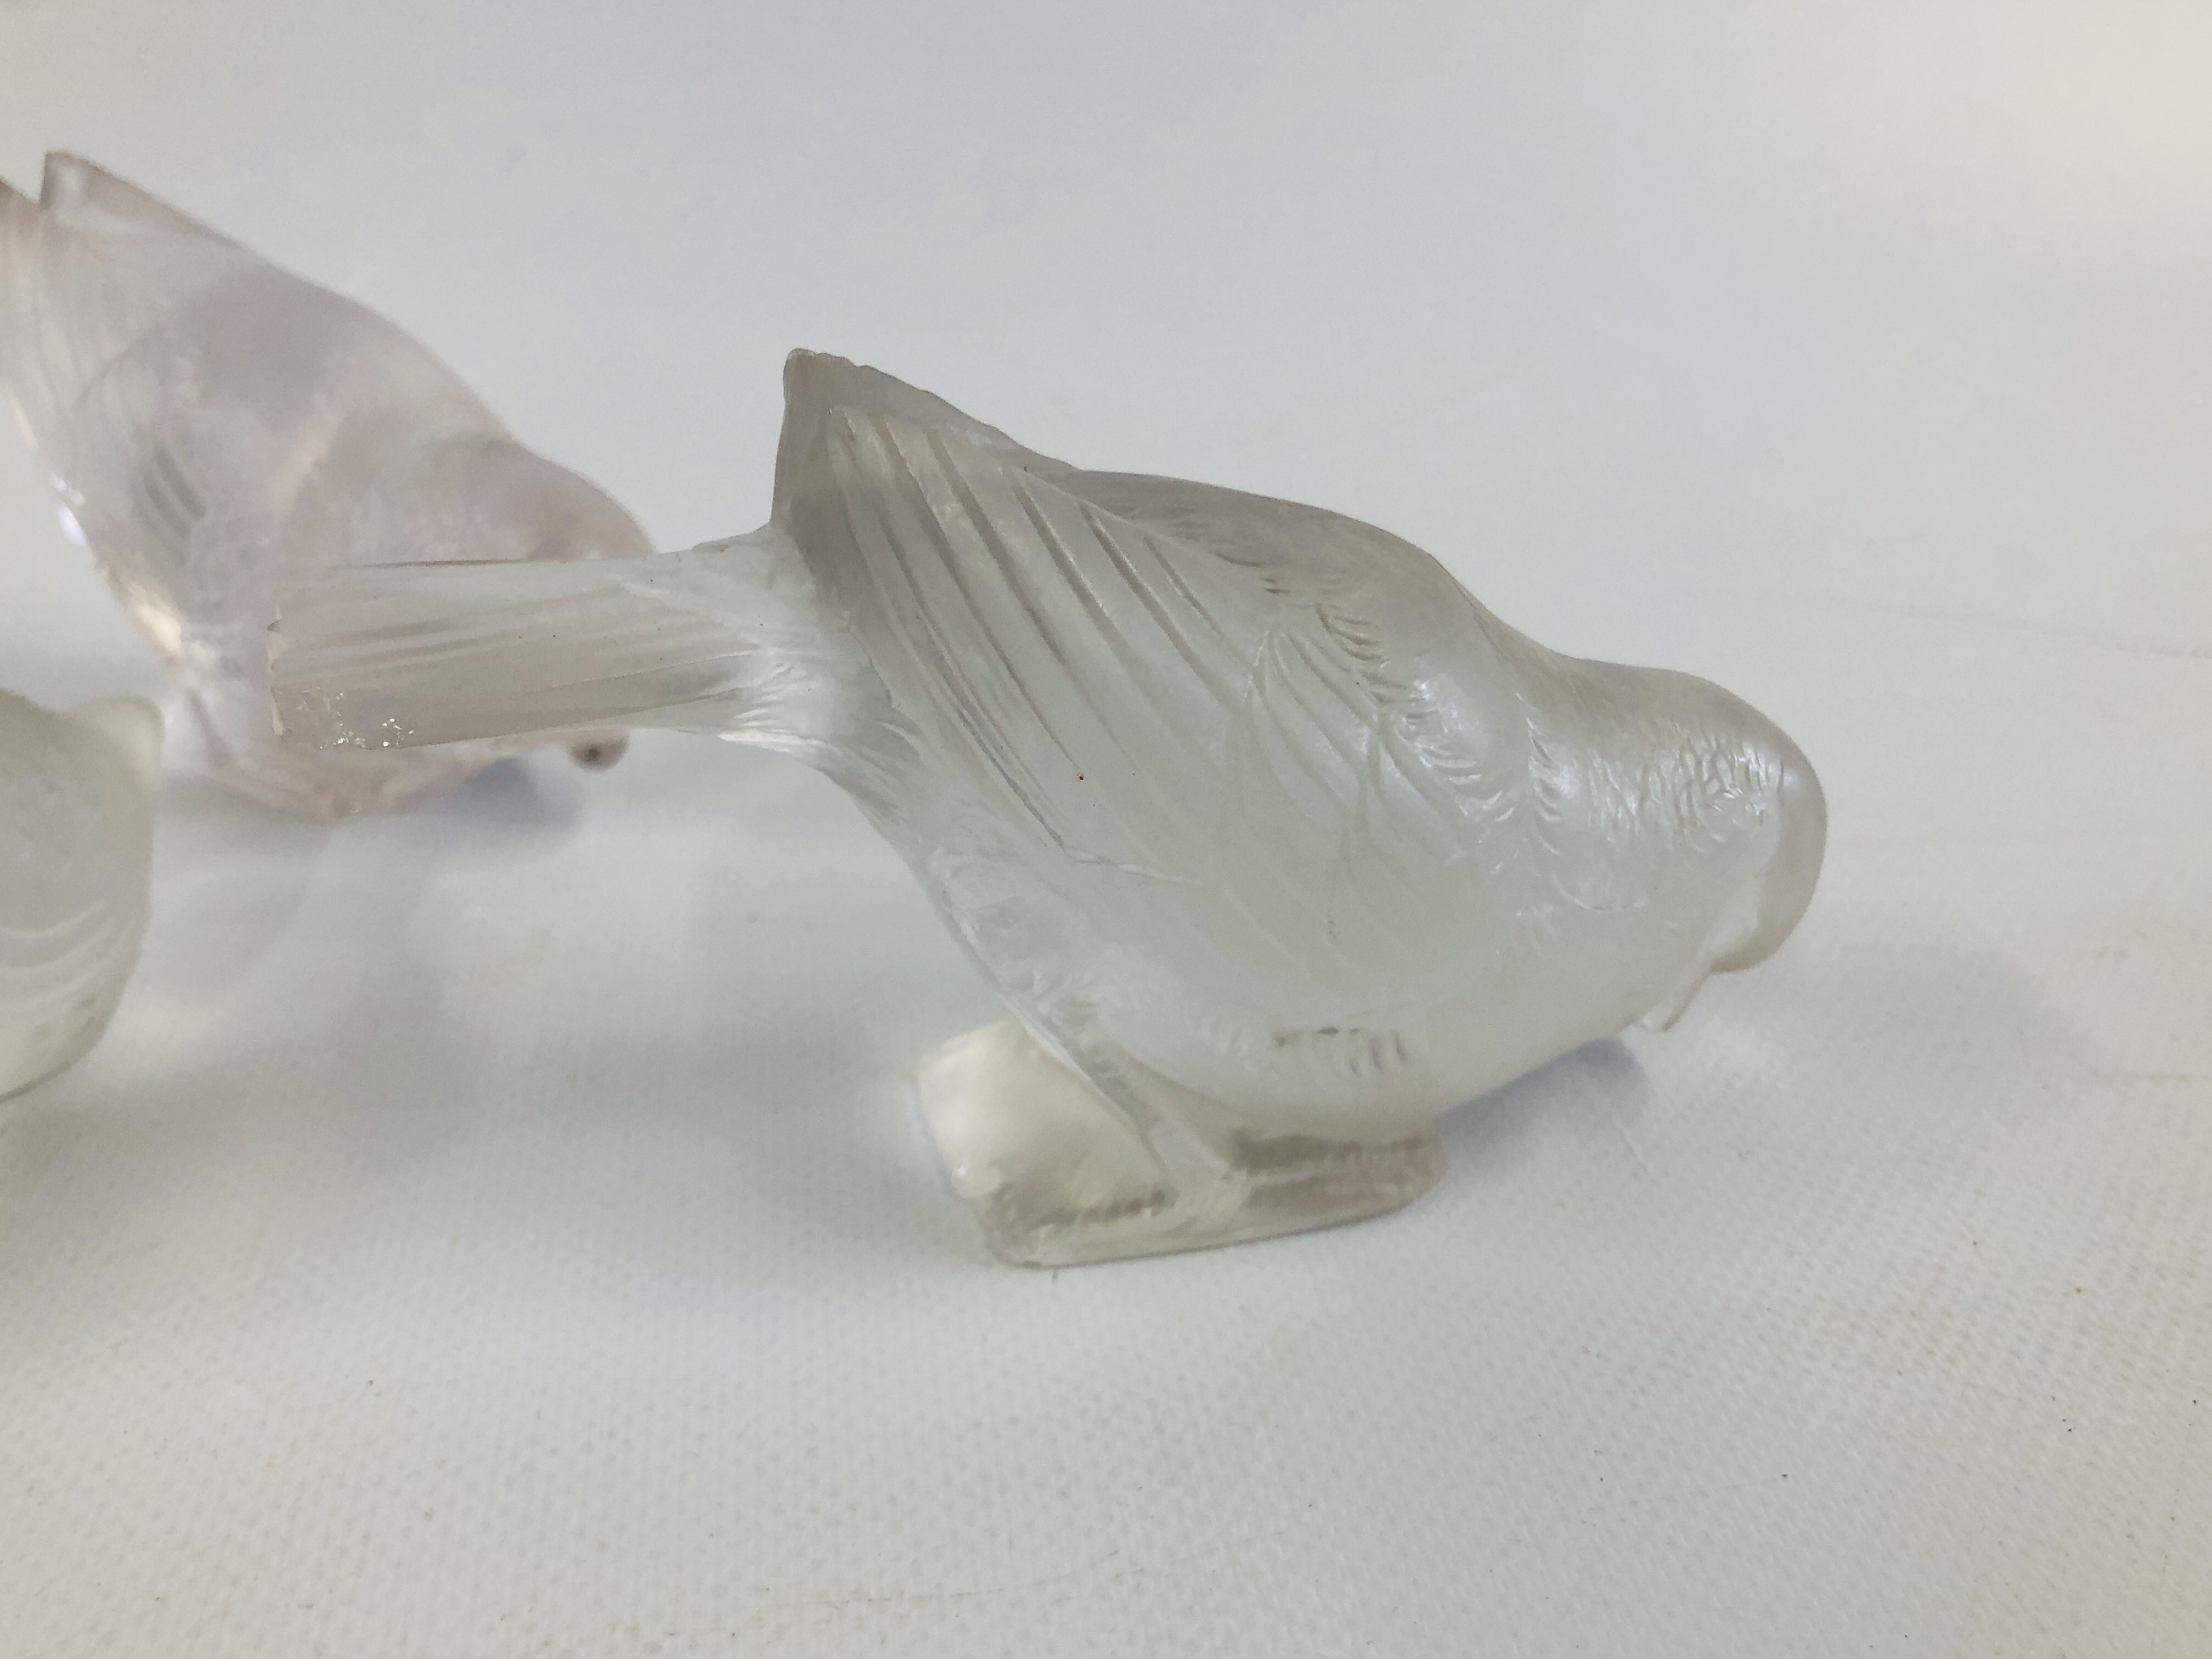 A COLLECTION OF 4 LALIQUE BIRDS A/F ALONG WITH 1 FURTHER FRENCH GLASS BIRD A/F. - Image 10 of 20